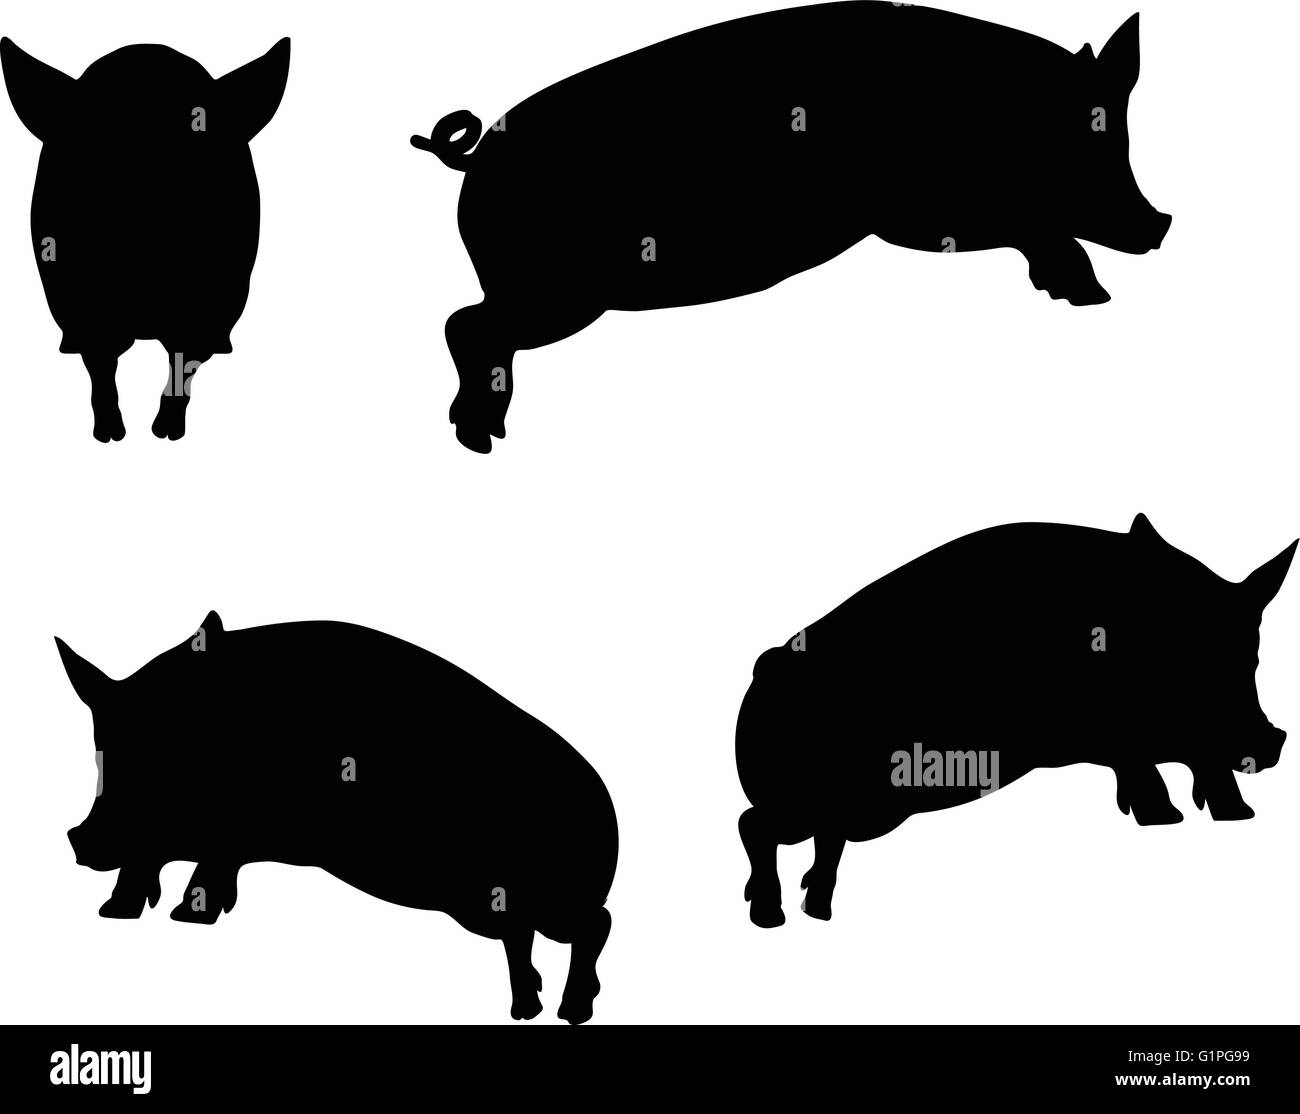 Vector Image, pig silhouette, in Jump pose, isolated on white background Stock Vector